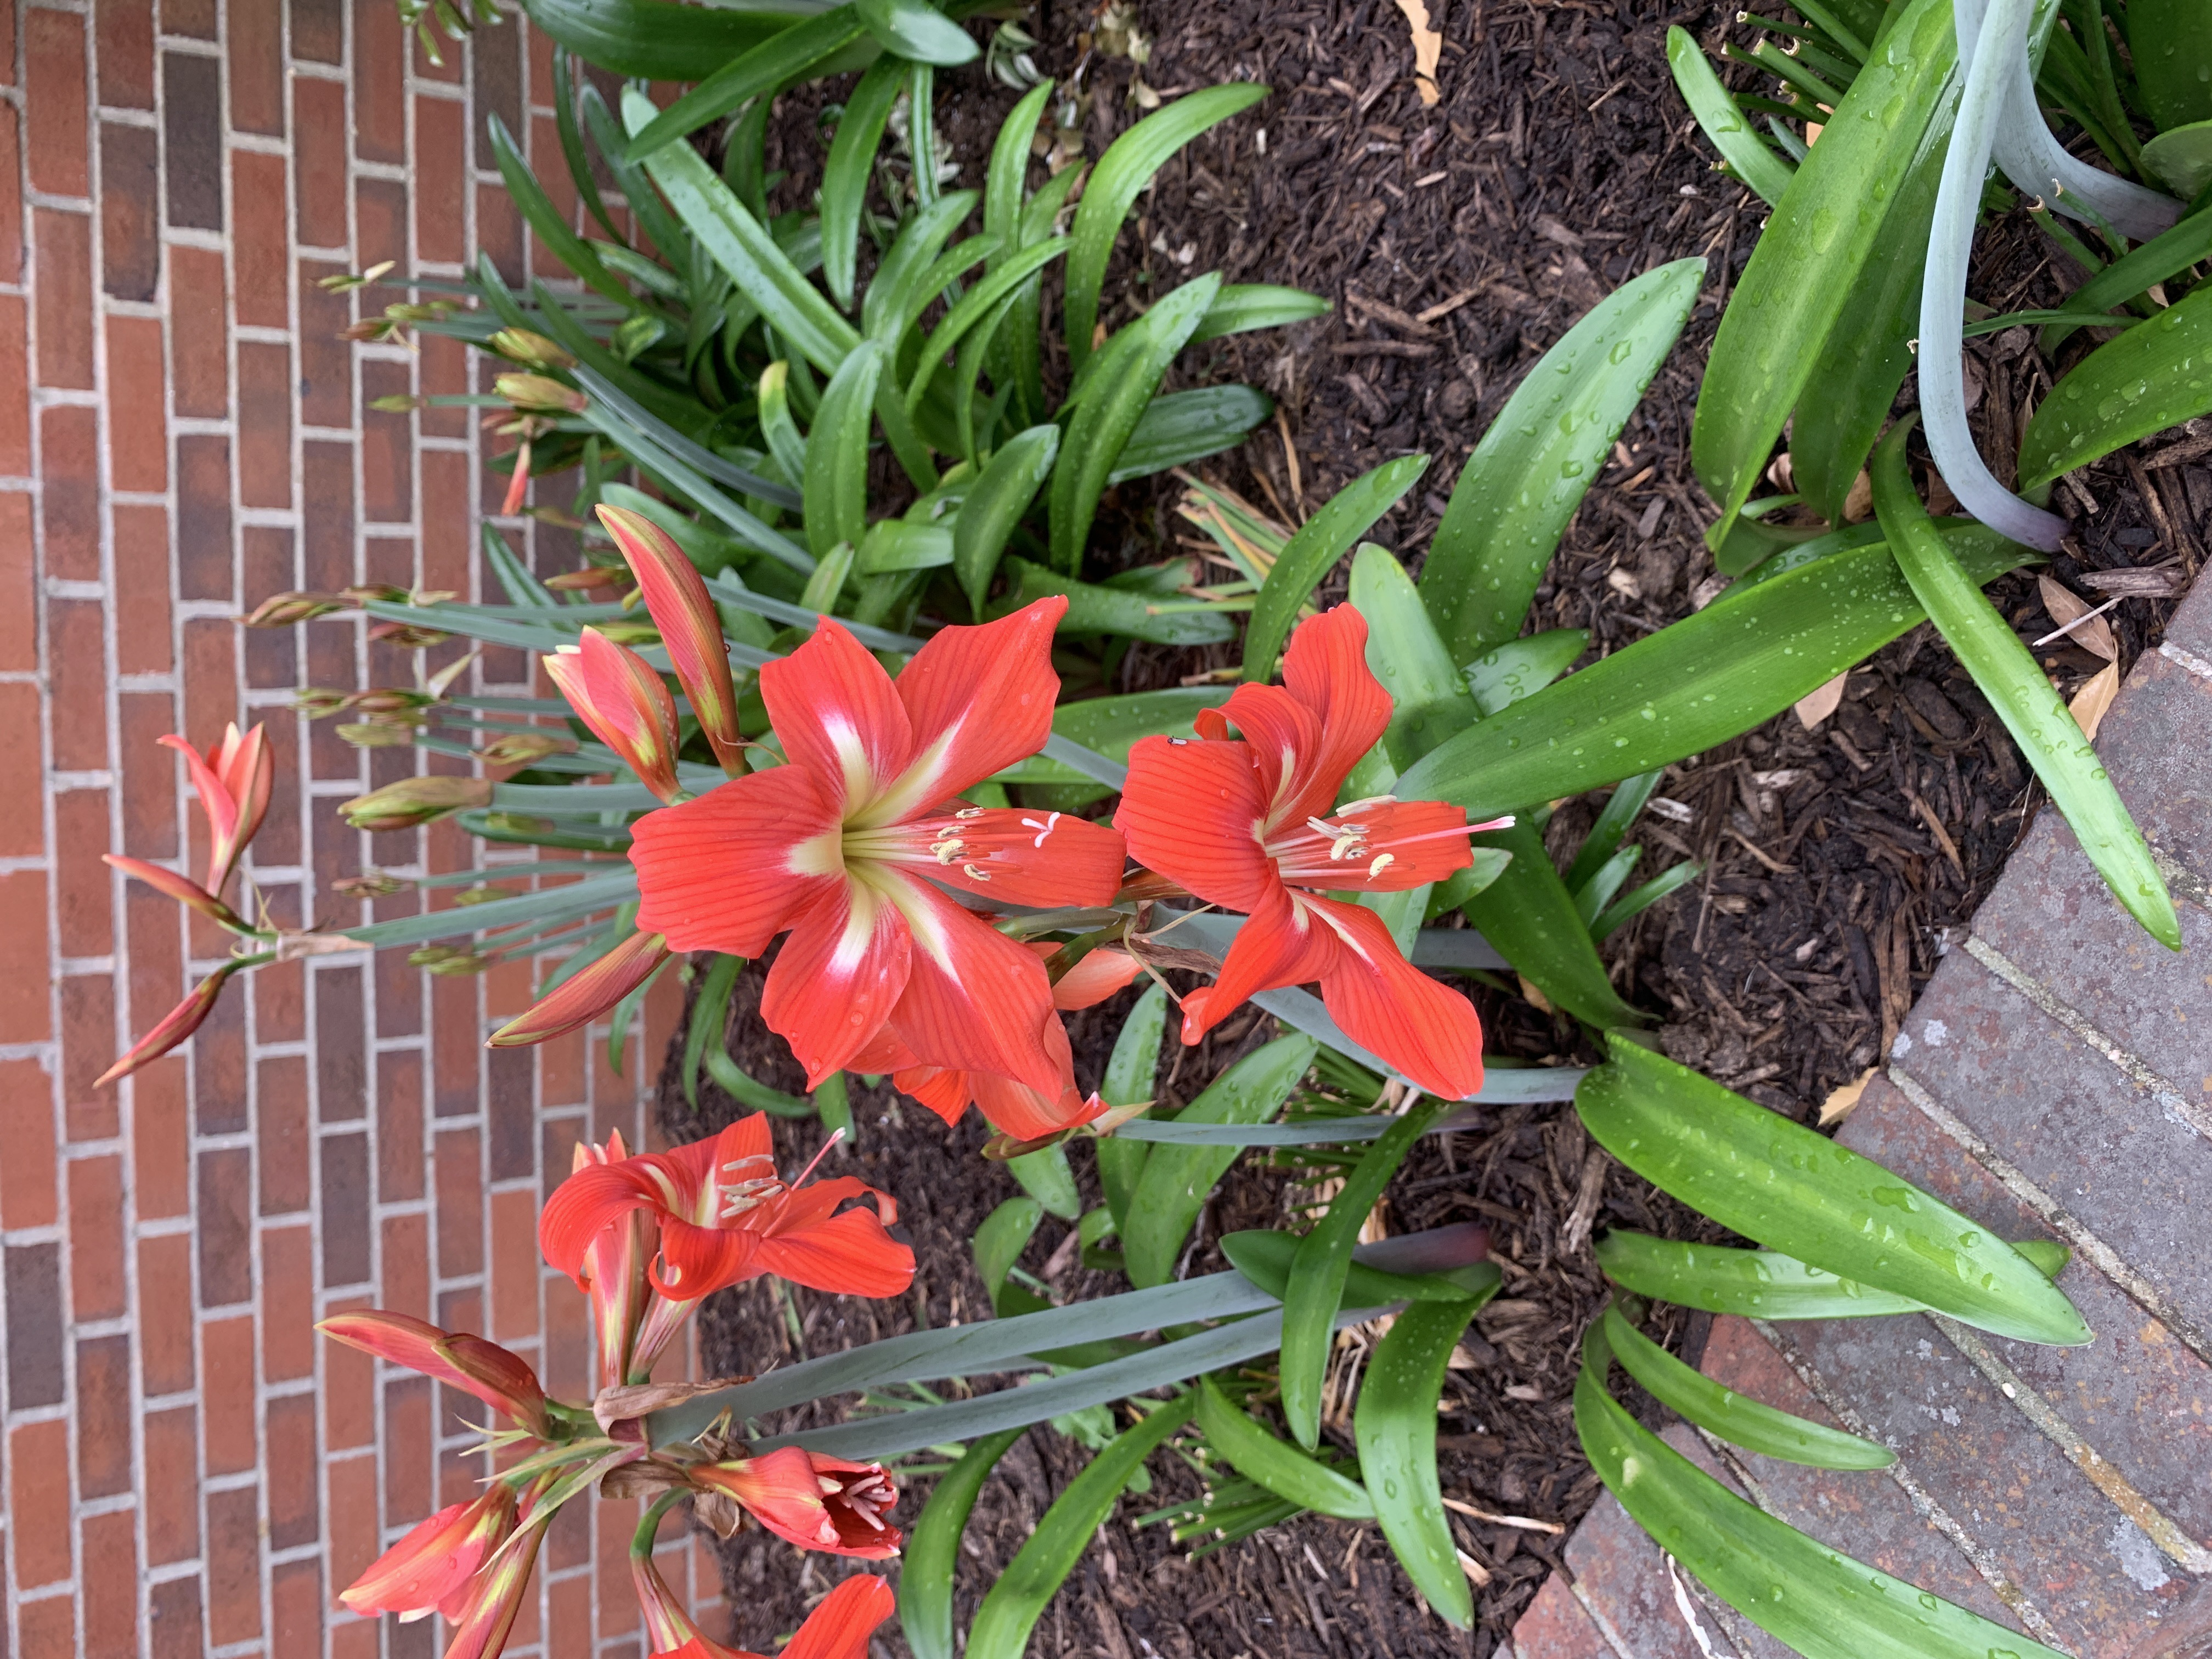 An amaryllis blooming in a garden bed.